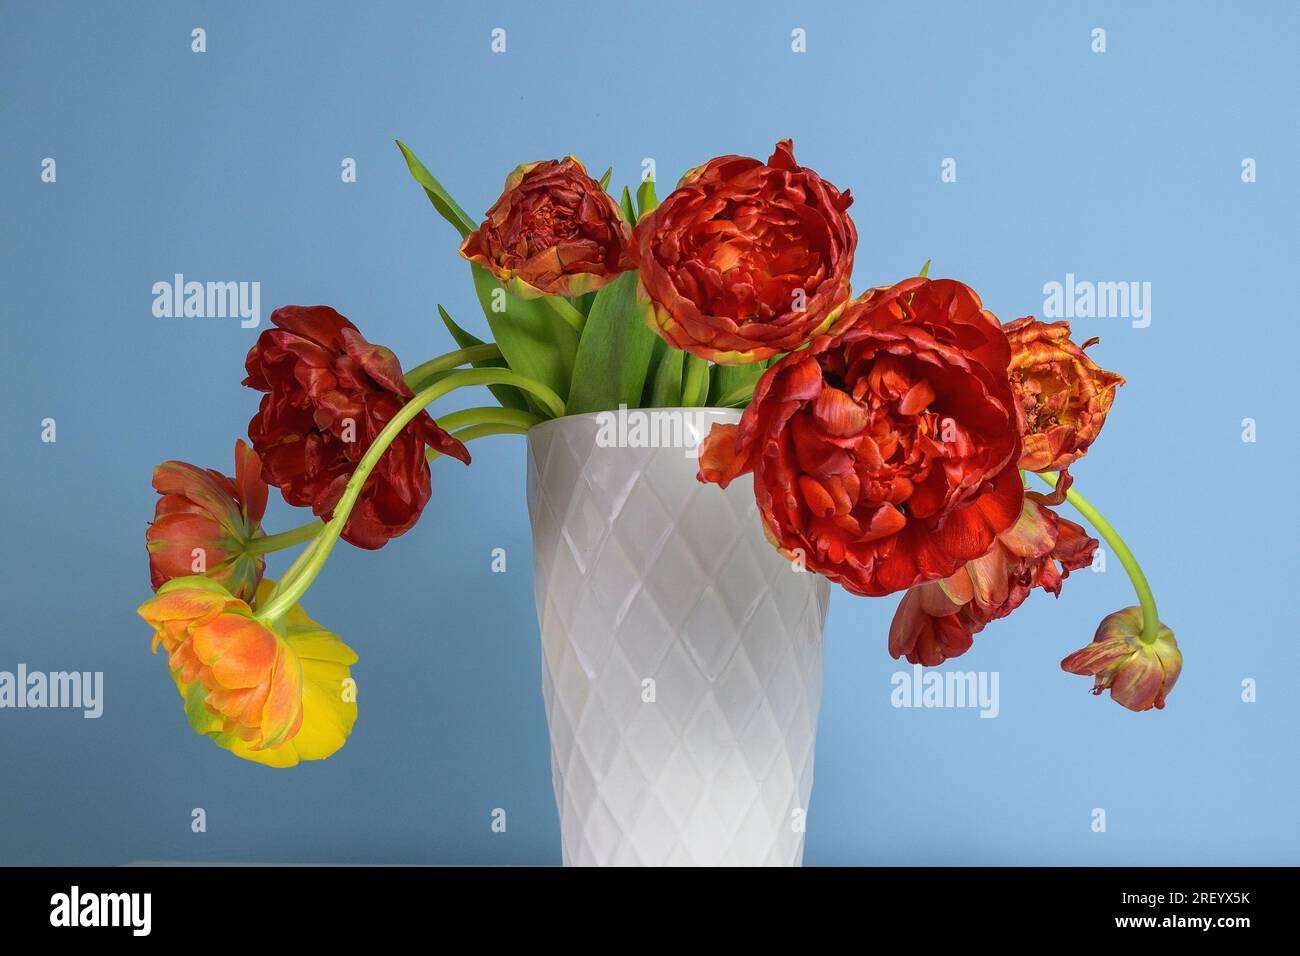 Withered peonies, yellow and red in a white ceramic vase on a light blue background Stock Photo